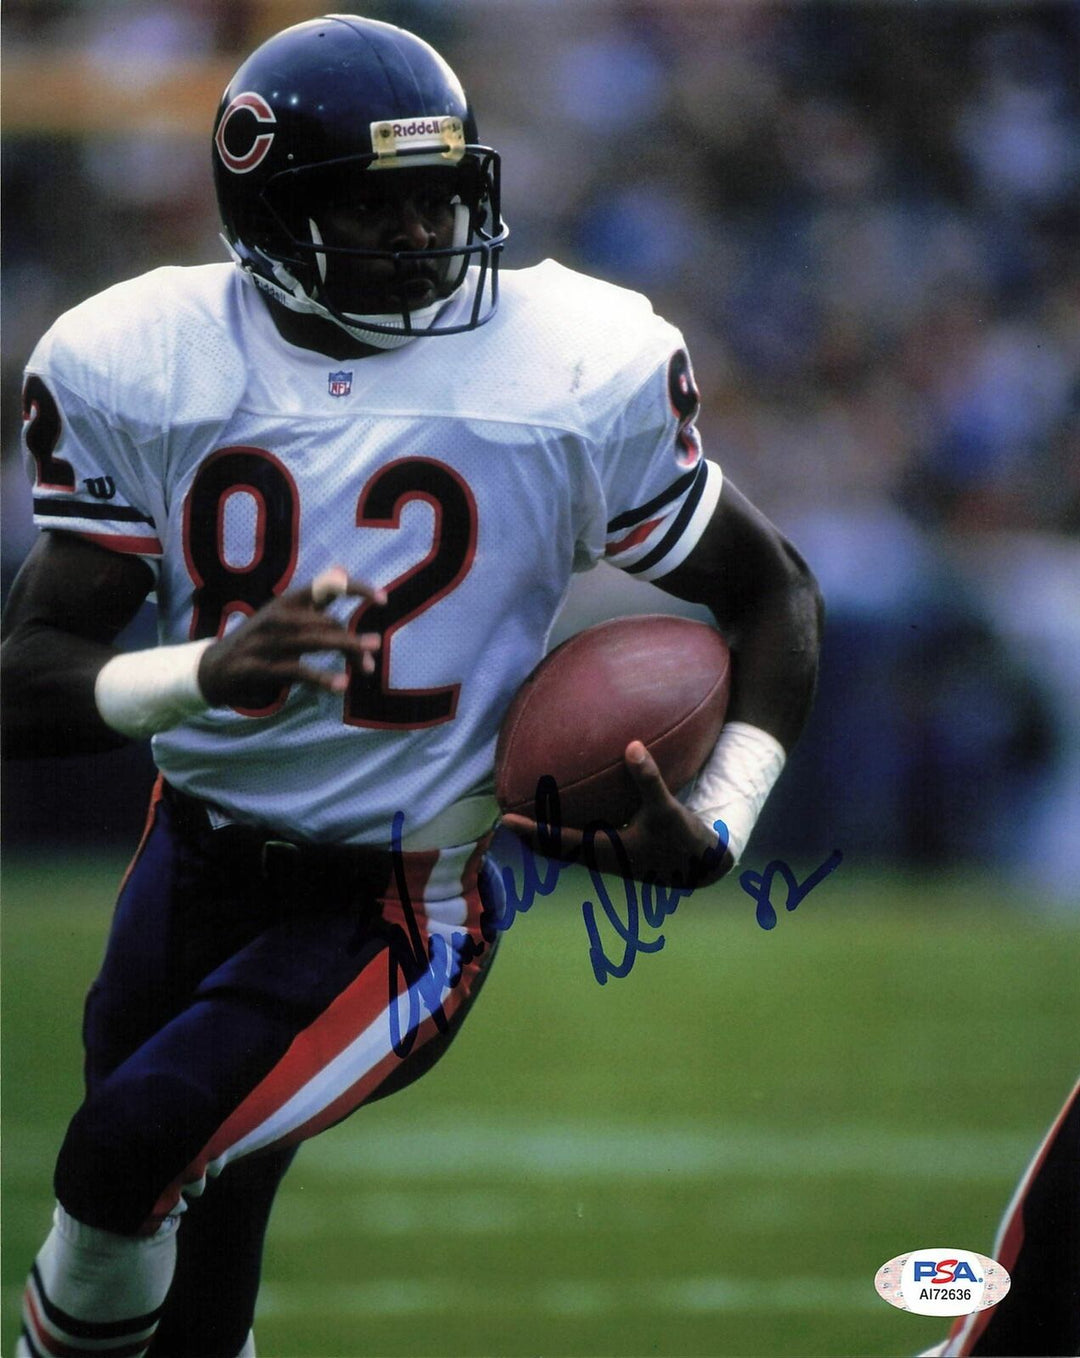 WENDELL DAVIS signed 8x10 photo PSA/DNA Chicago Bears Autographed Image 1